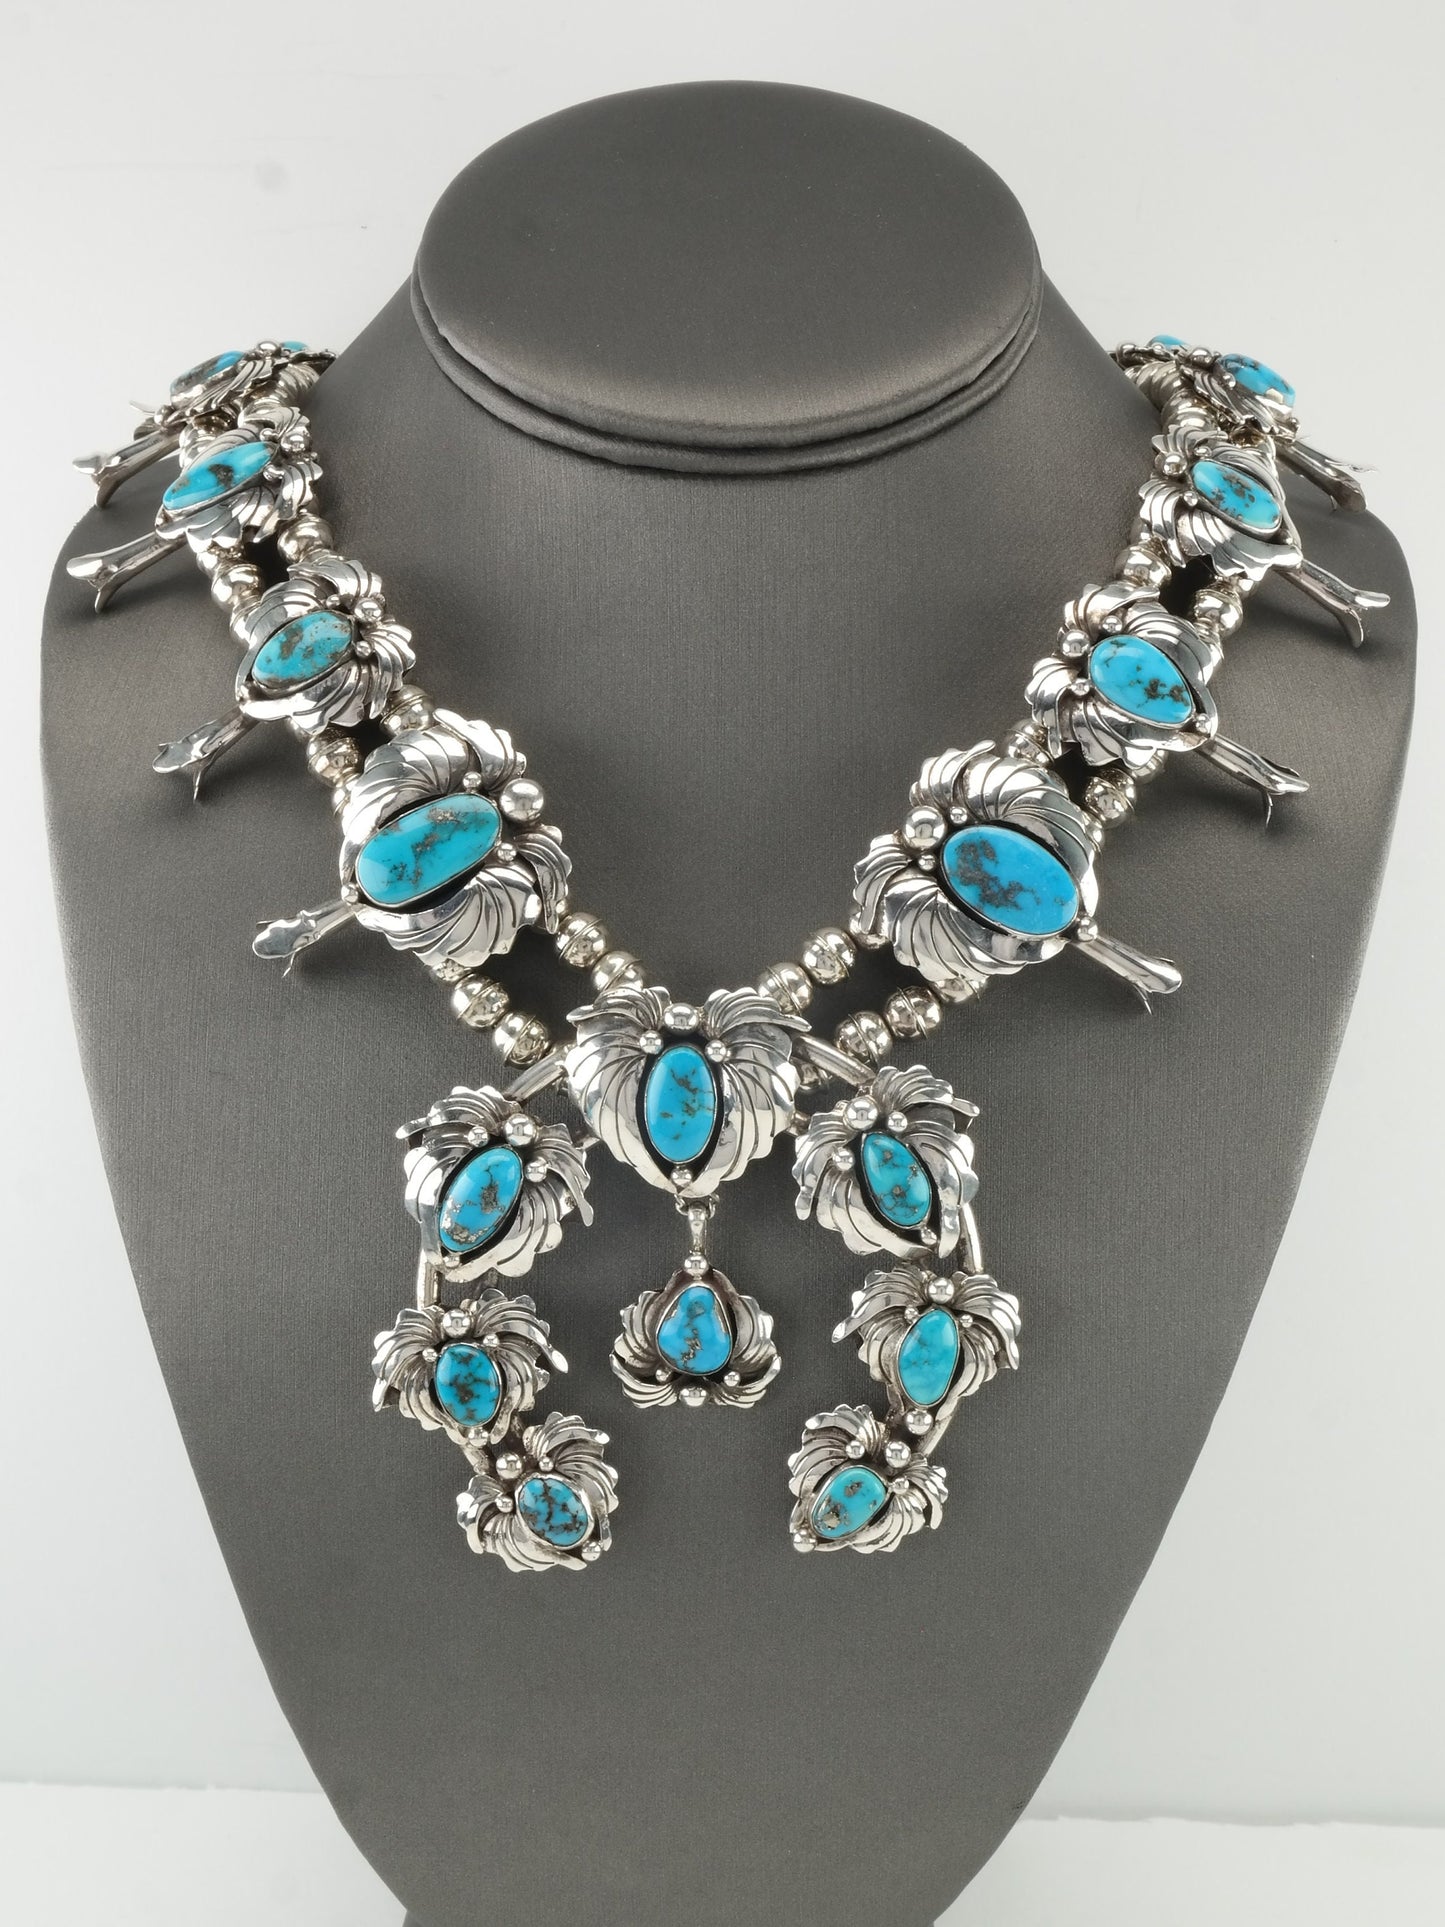 Vintage Native American Sterling Silver Blue Turquoise Squash Blossom Necklace Earrings Set